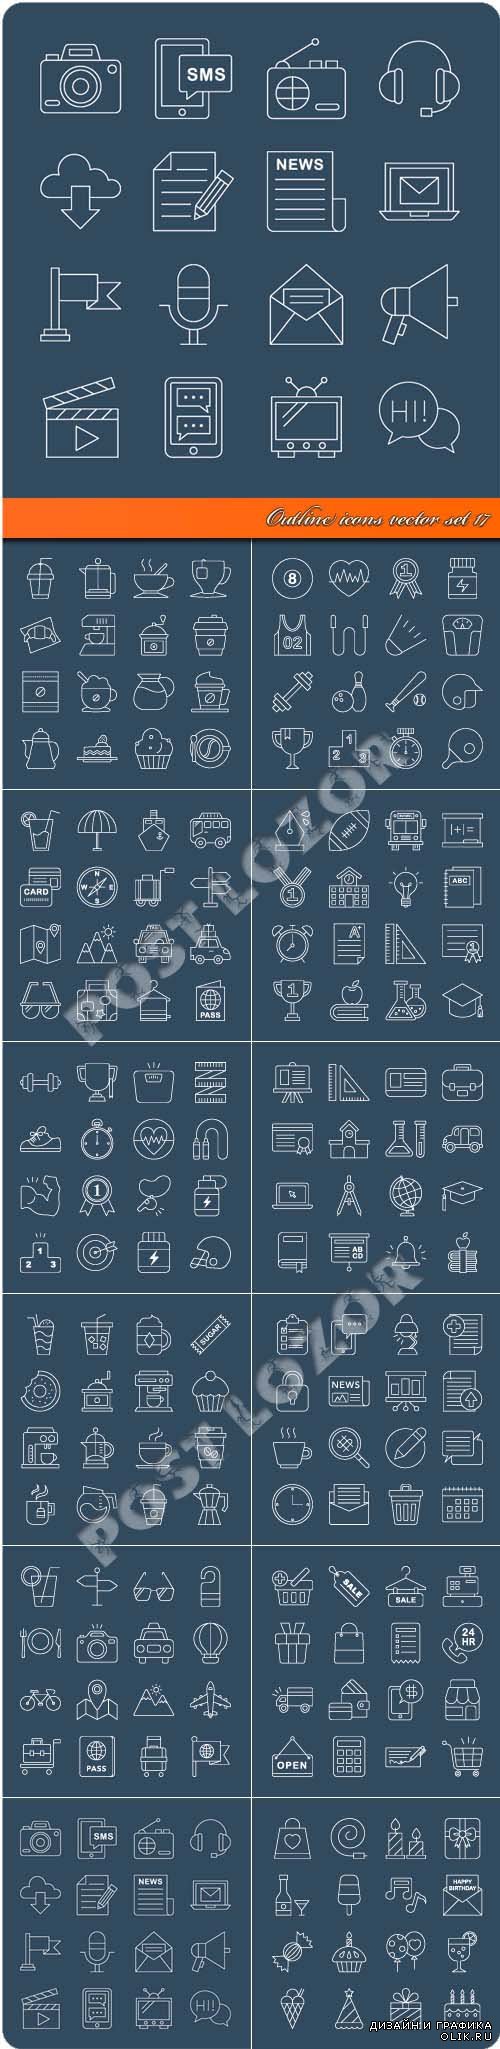 Outline icons vector set 17